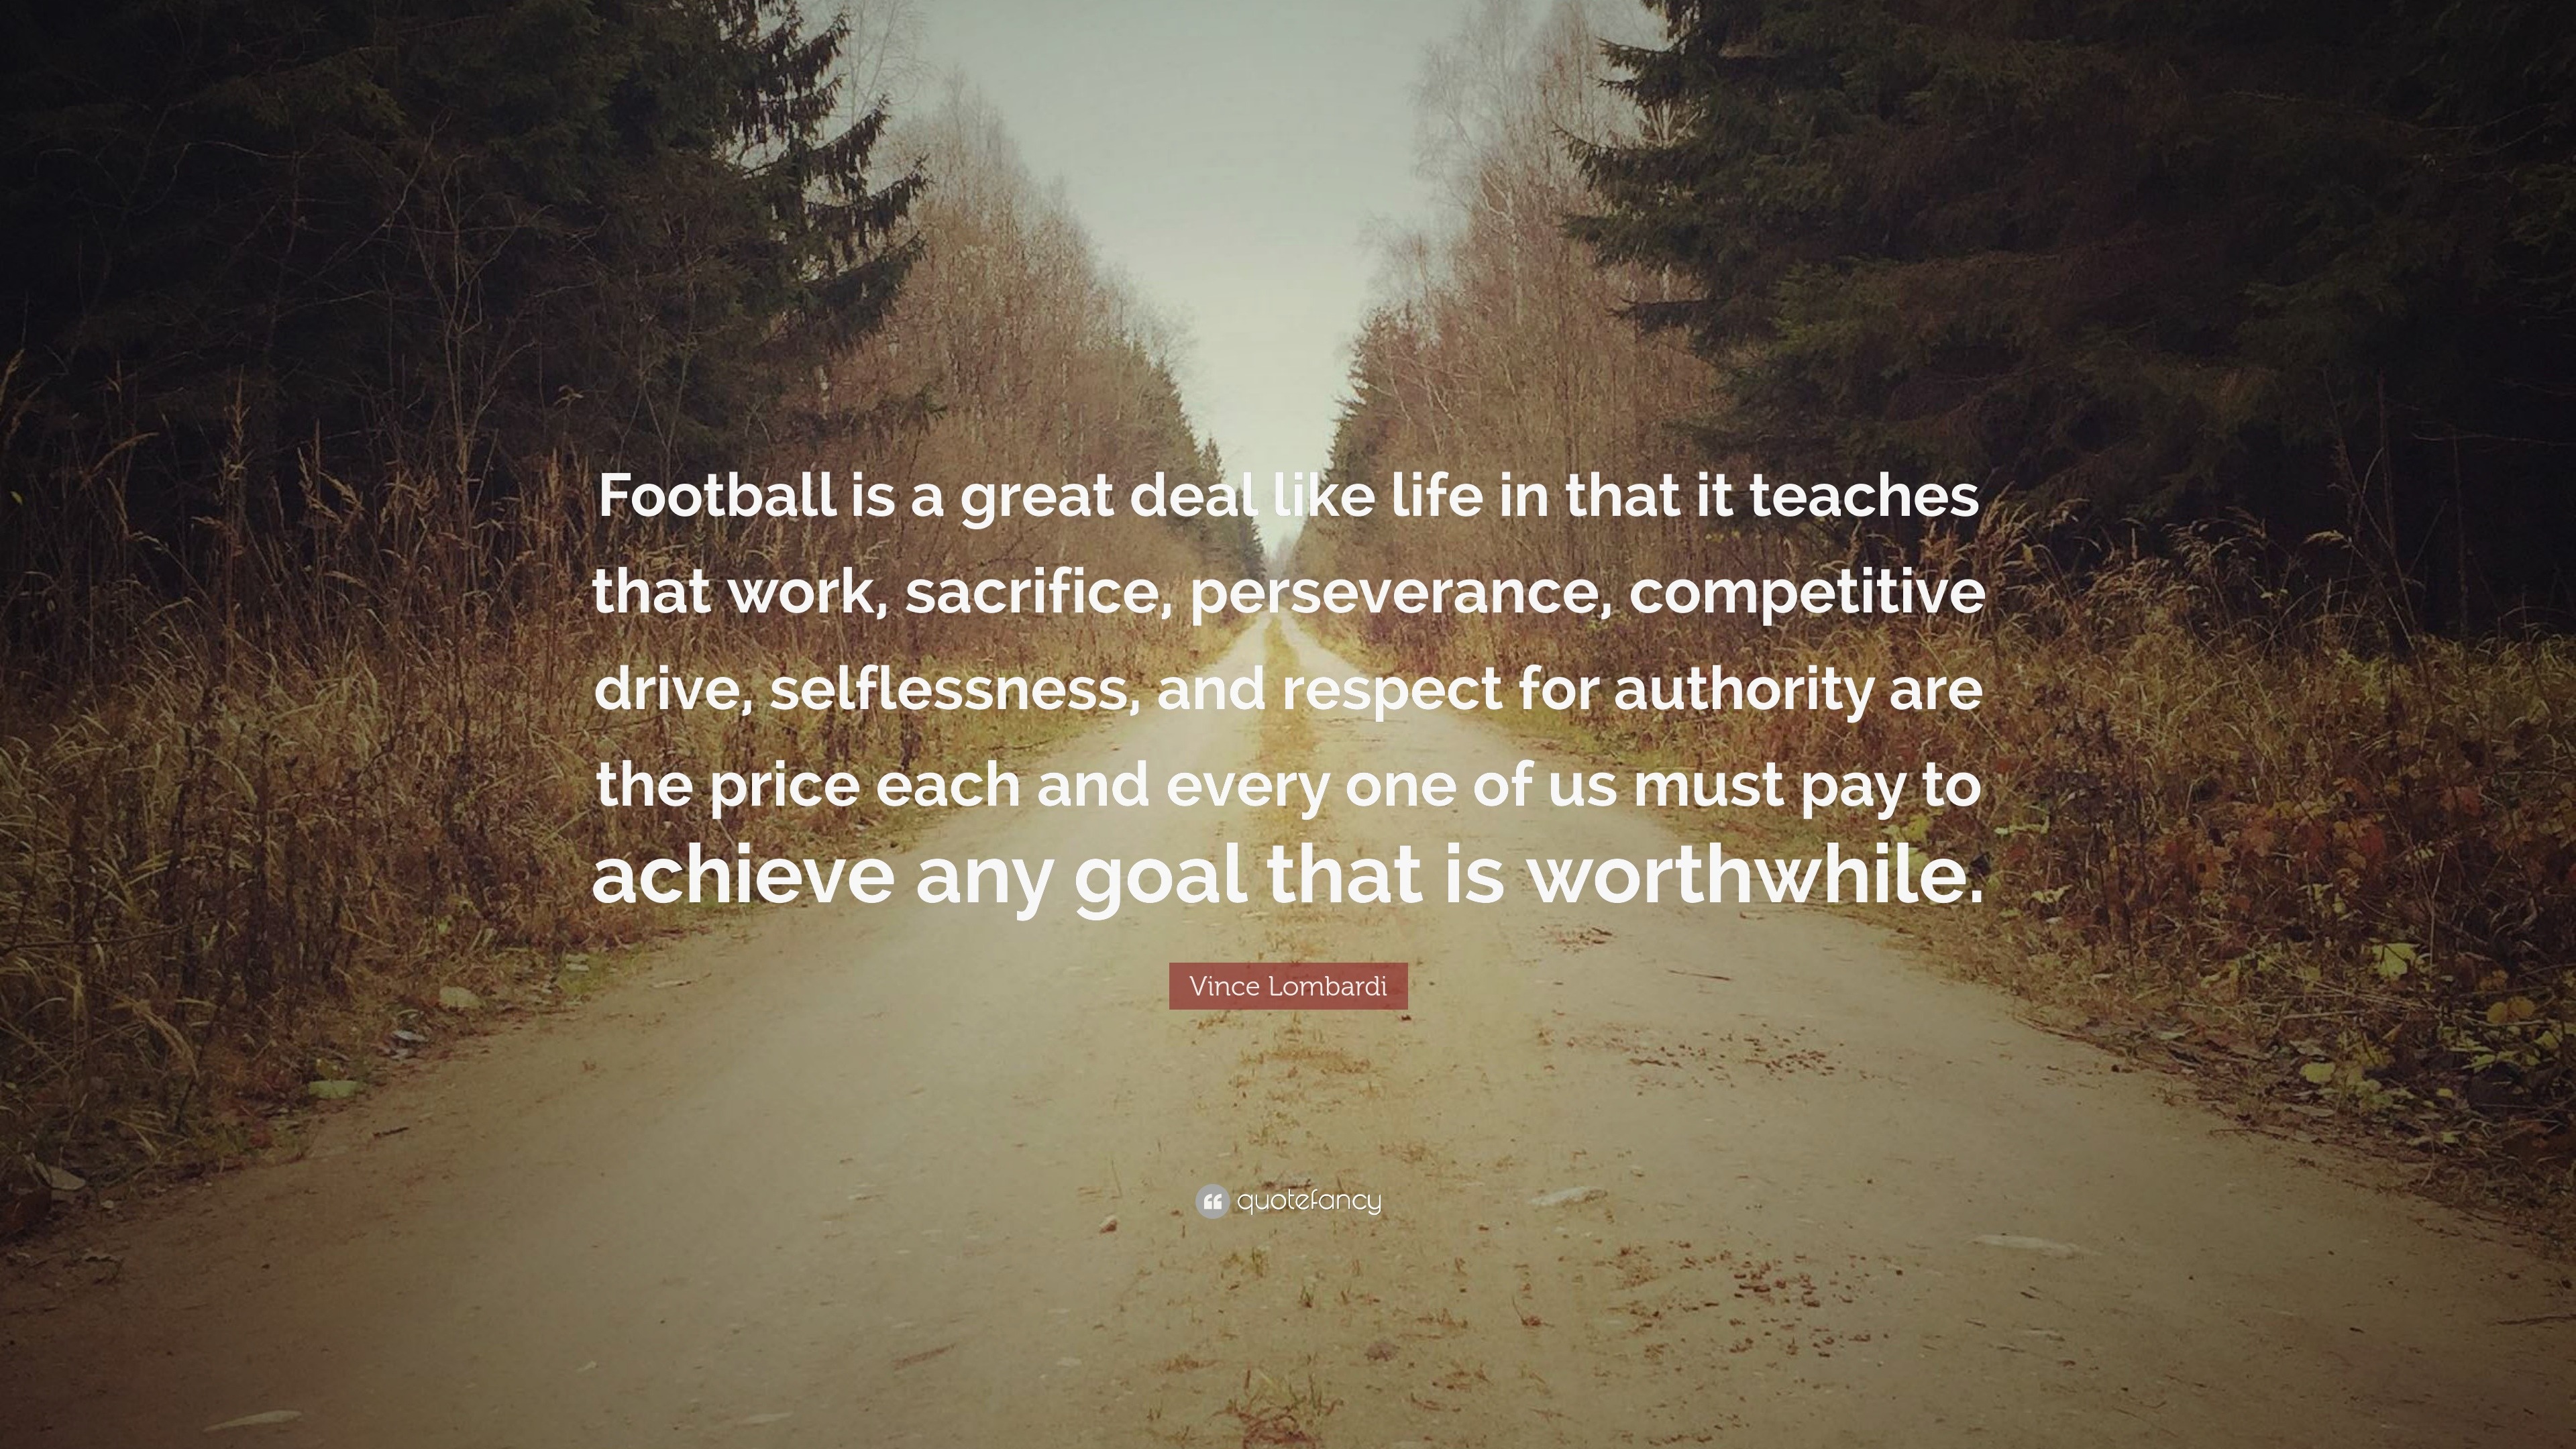 Vince Lombardi Quote: “Football is a great deal like life in that it teaches that work 